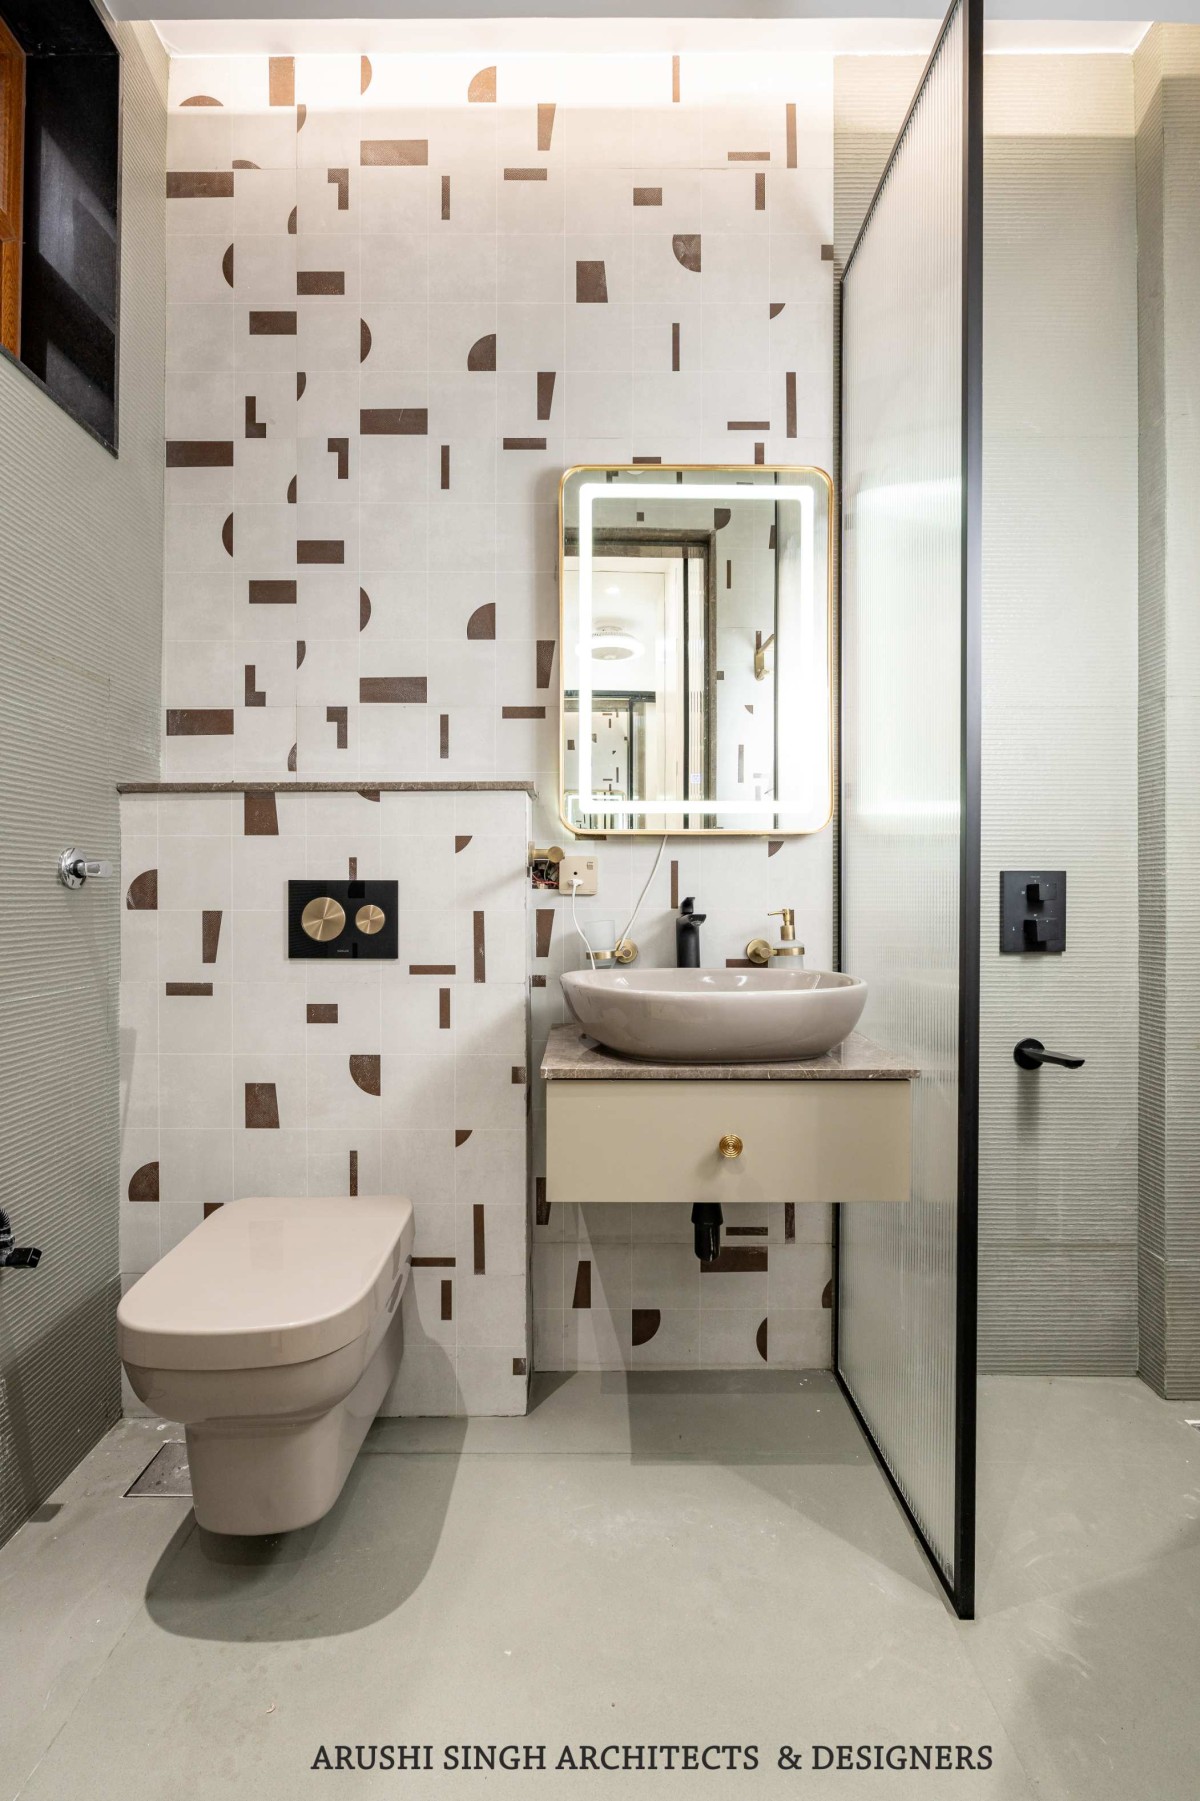 Bathroom of The Narayan House by Arushi Singh Architects & Designers